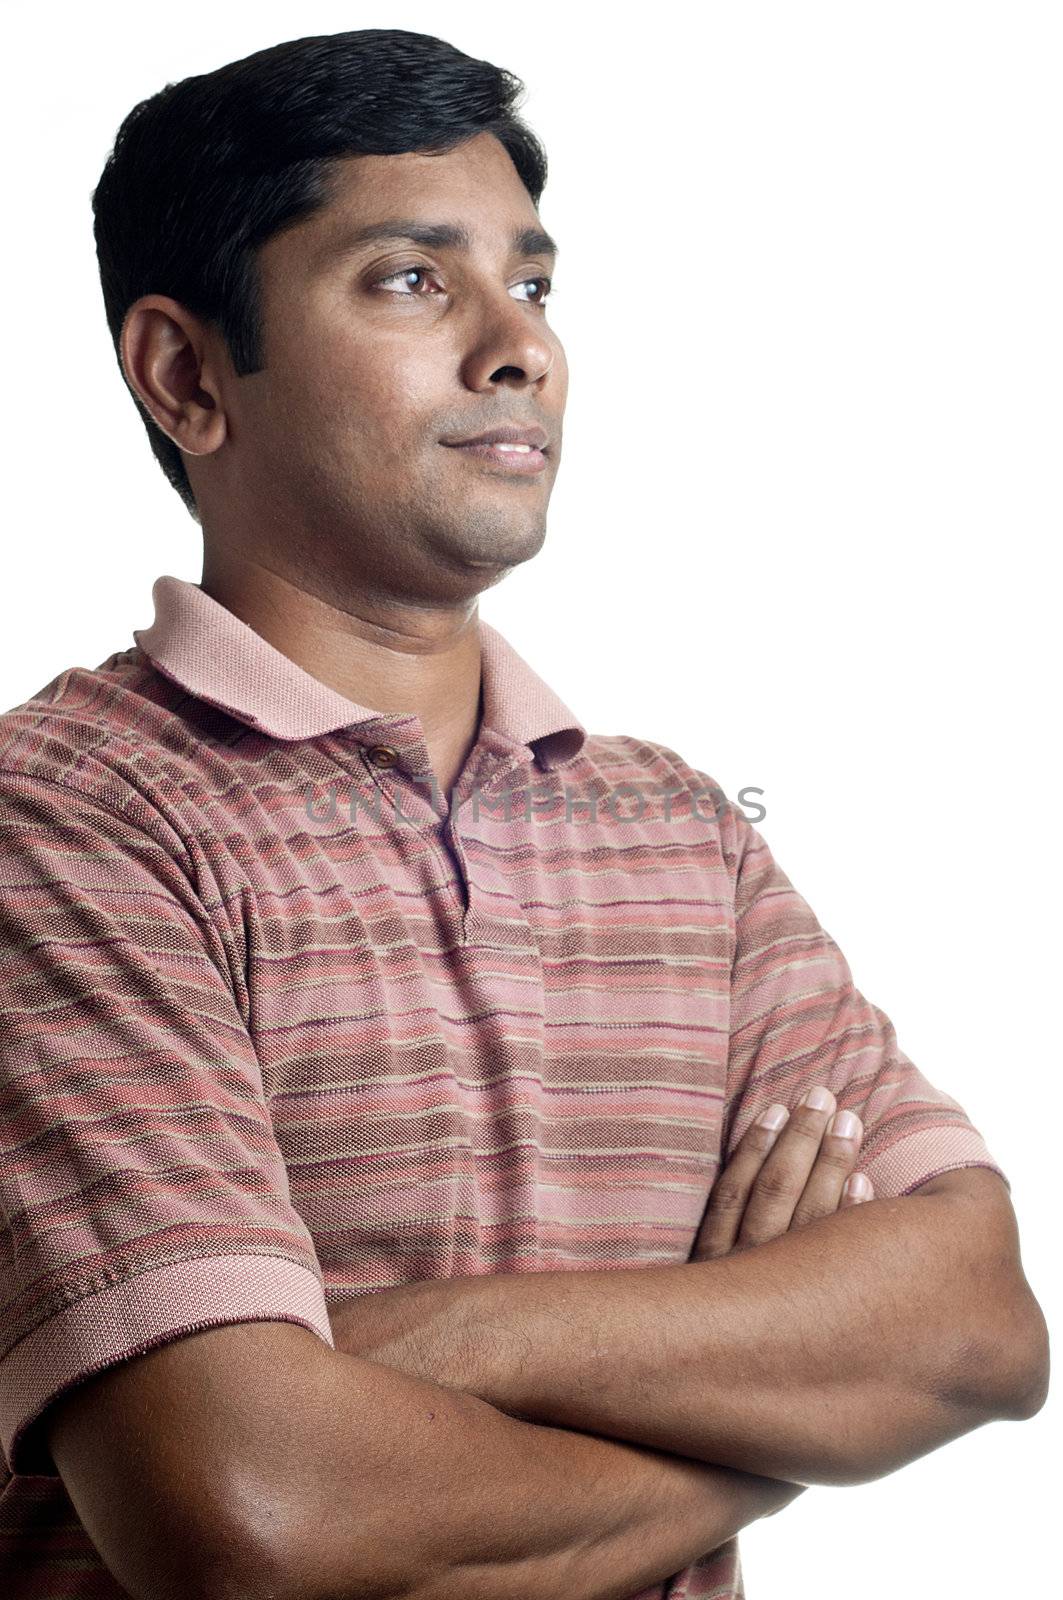 A portrait of an east Indian man